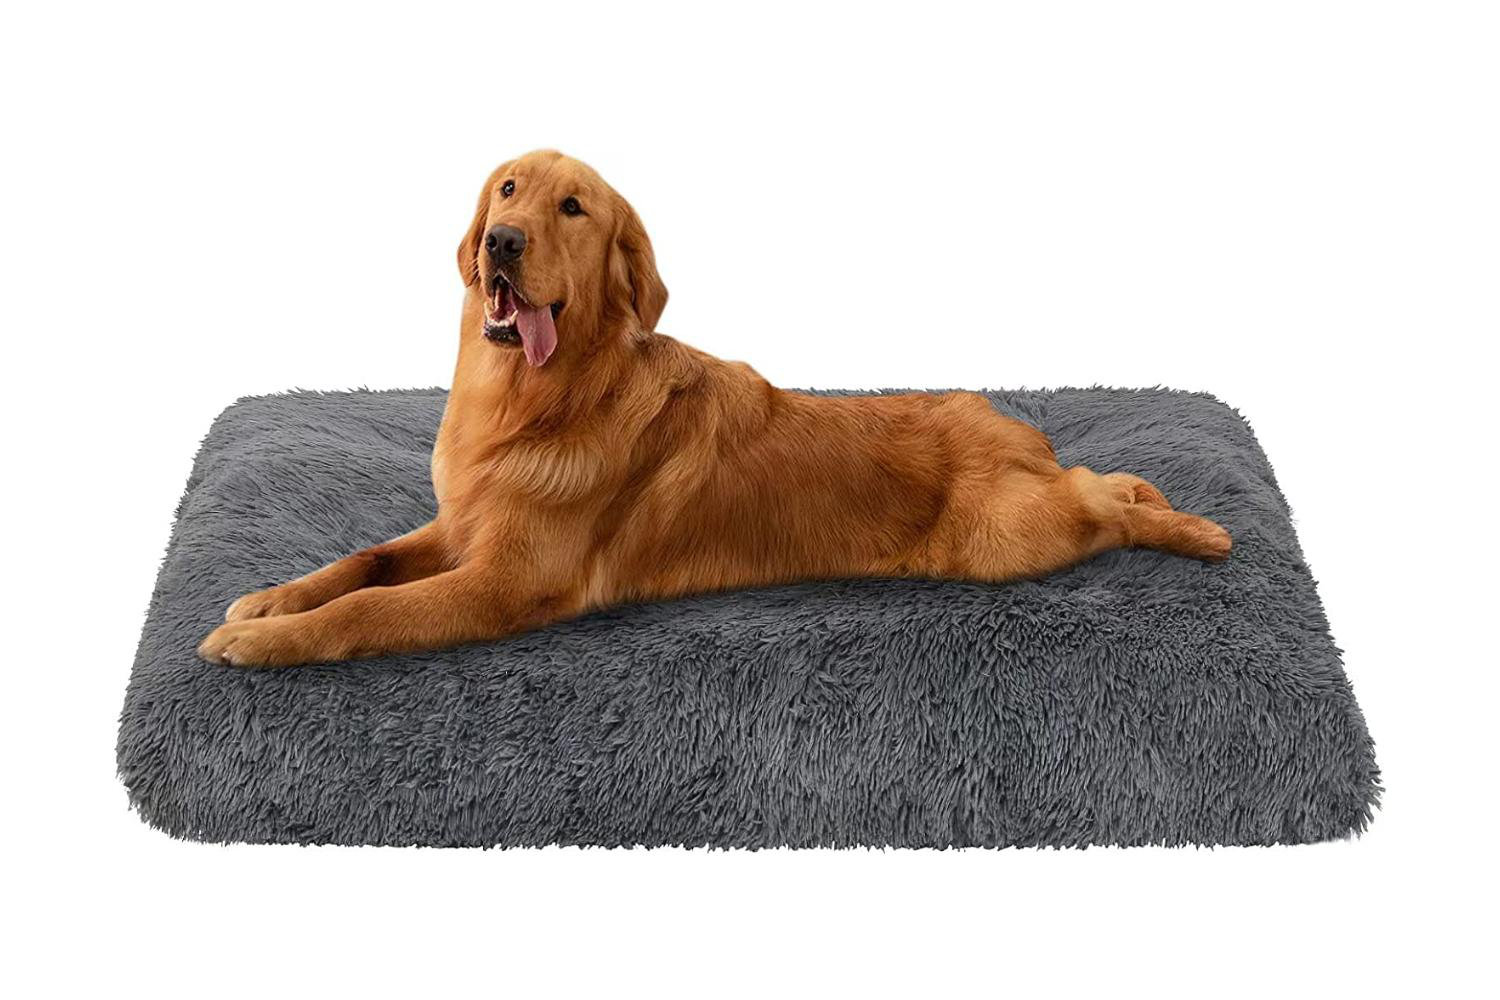 Faux Fur Orthopedic Dog Bed, Pet Rug for Dogs, Washable Pet Beds